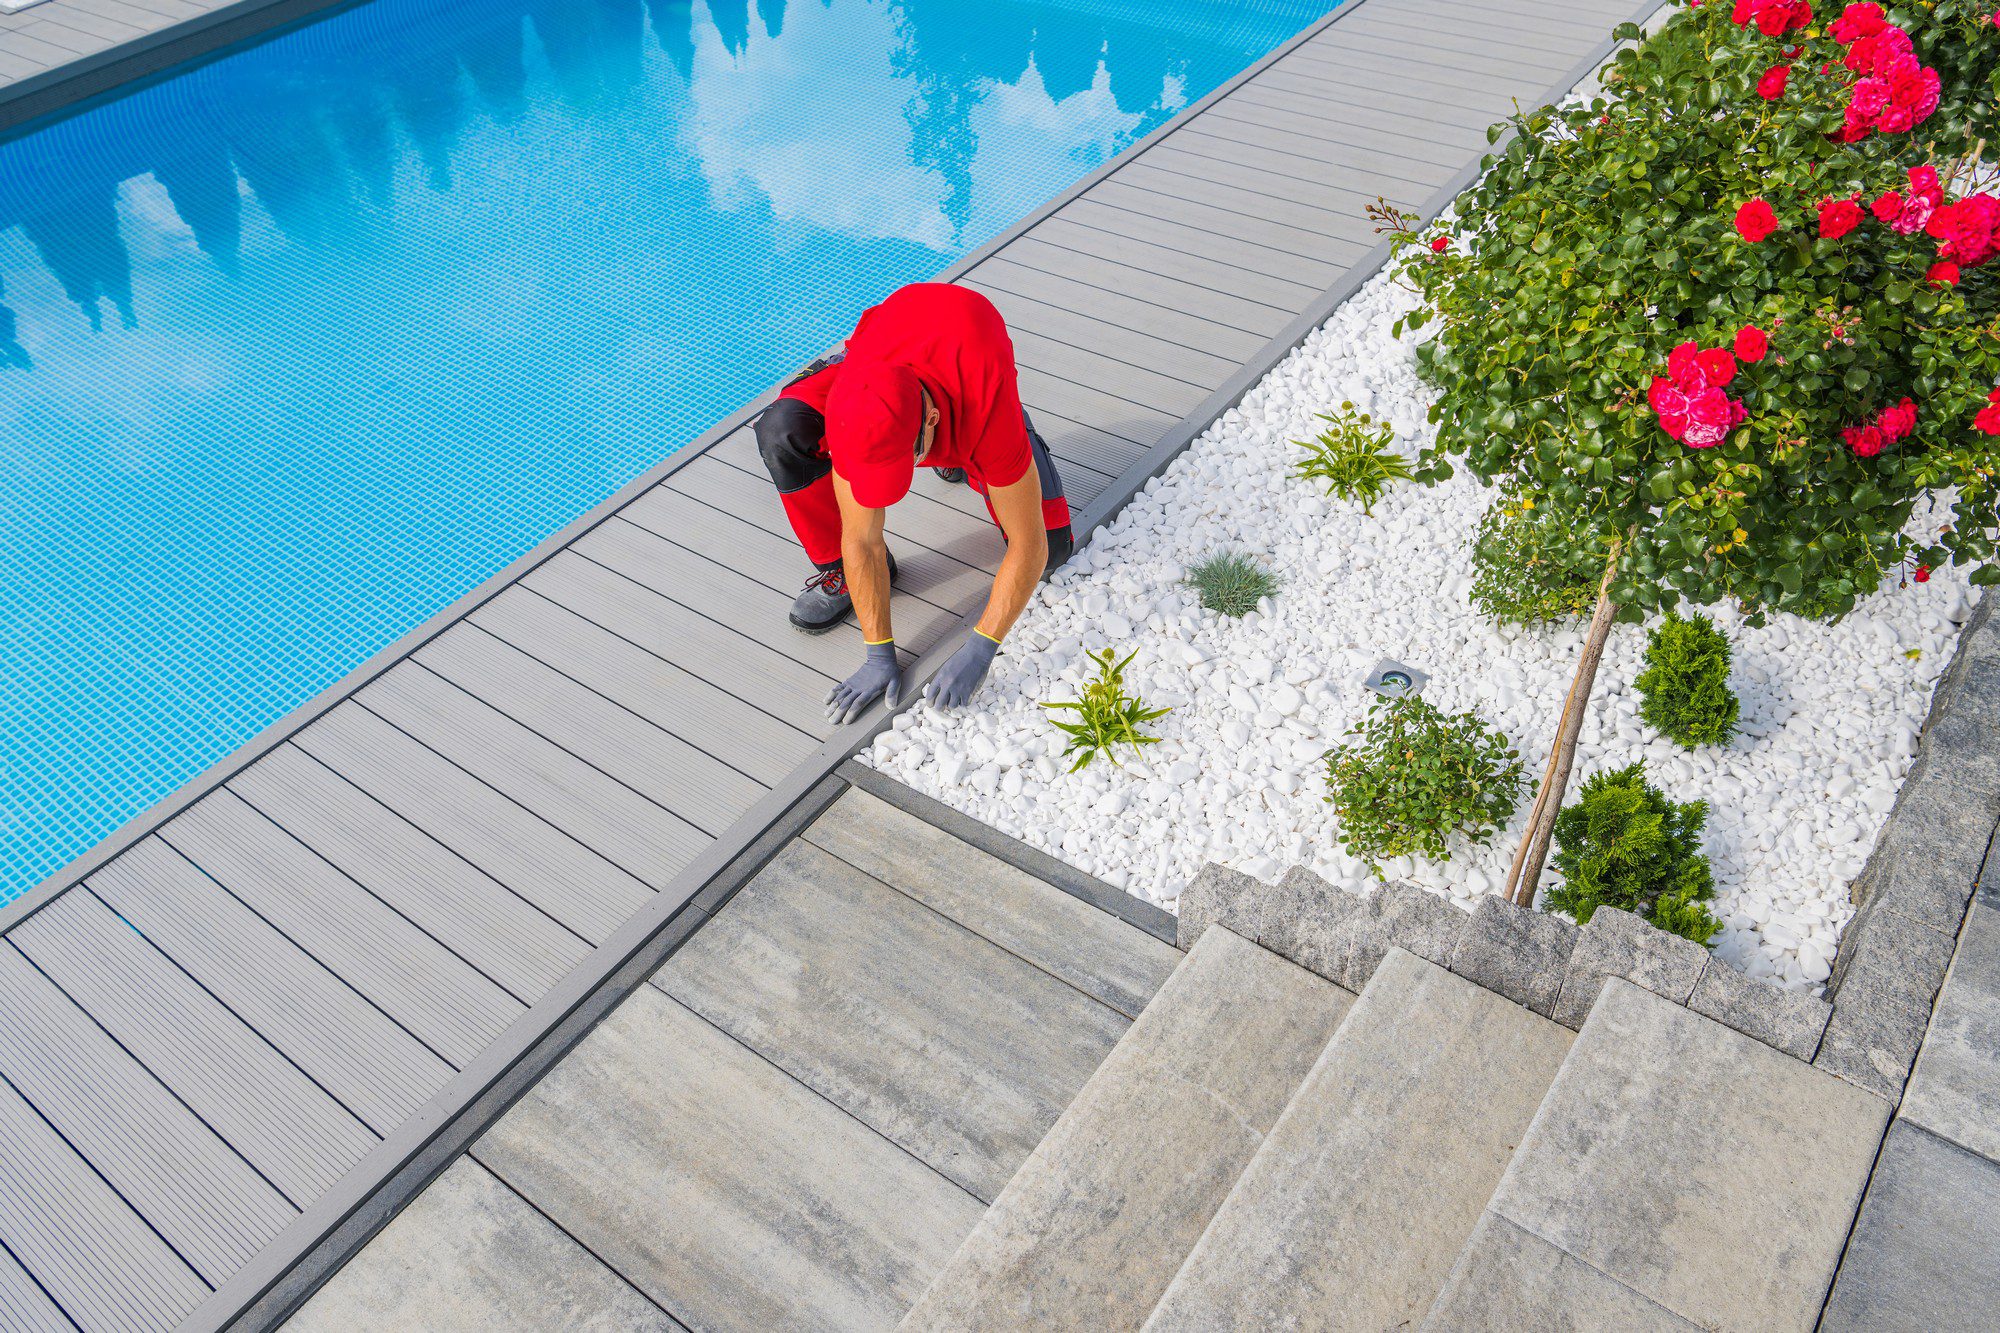 The image depicts an outdoor setting with a swimming pool, landscaping, and a person at work. Specifically:1. A clear, blue swimming pool with calm water reflecting the sky, surrounded by a stylish grey composite decking.
2. A red-shirted individual appears to be performing maintenance or gardening tasks. They are bending over and wearing gardening gloves, suggesting that they might be working with the plants or adjusting the stones.
3. A neatly arranged garden bed with white stones and a variety of green plants, including what looks like a rose bush in full bloom with red flowers, suggesting attentive gardening care.
4. A paved area with large, rectangular stone tiles leading to or from the pool area, contrasting with both the decking and the white stones of the garden bed.
5. The overall setting implies a well-maintained and designed outdoor area, likely in a residential or possibly a commercial location.
The person's presence adds a human element to the scene, indicating care and maintenance of the landscaping and pool area. The image conveys a sense of tranquility with the stillness of the pool and the disciplined design of the garden.